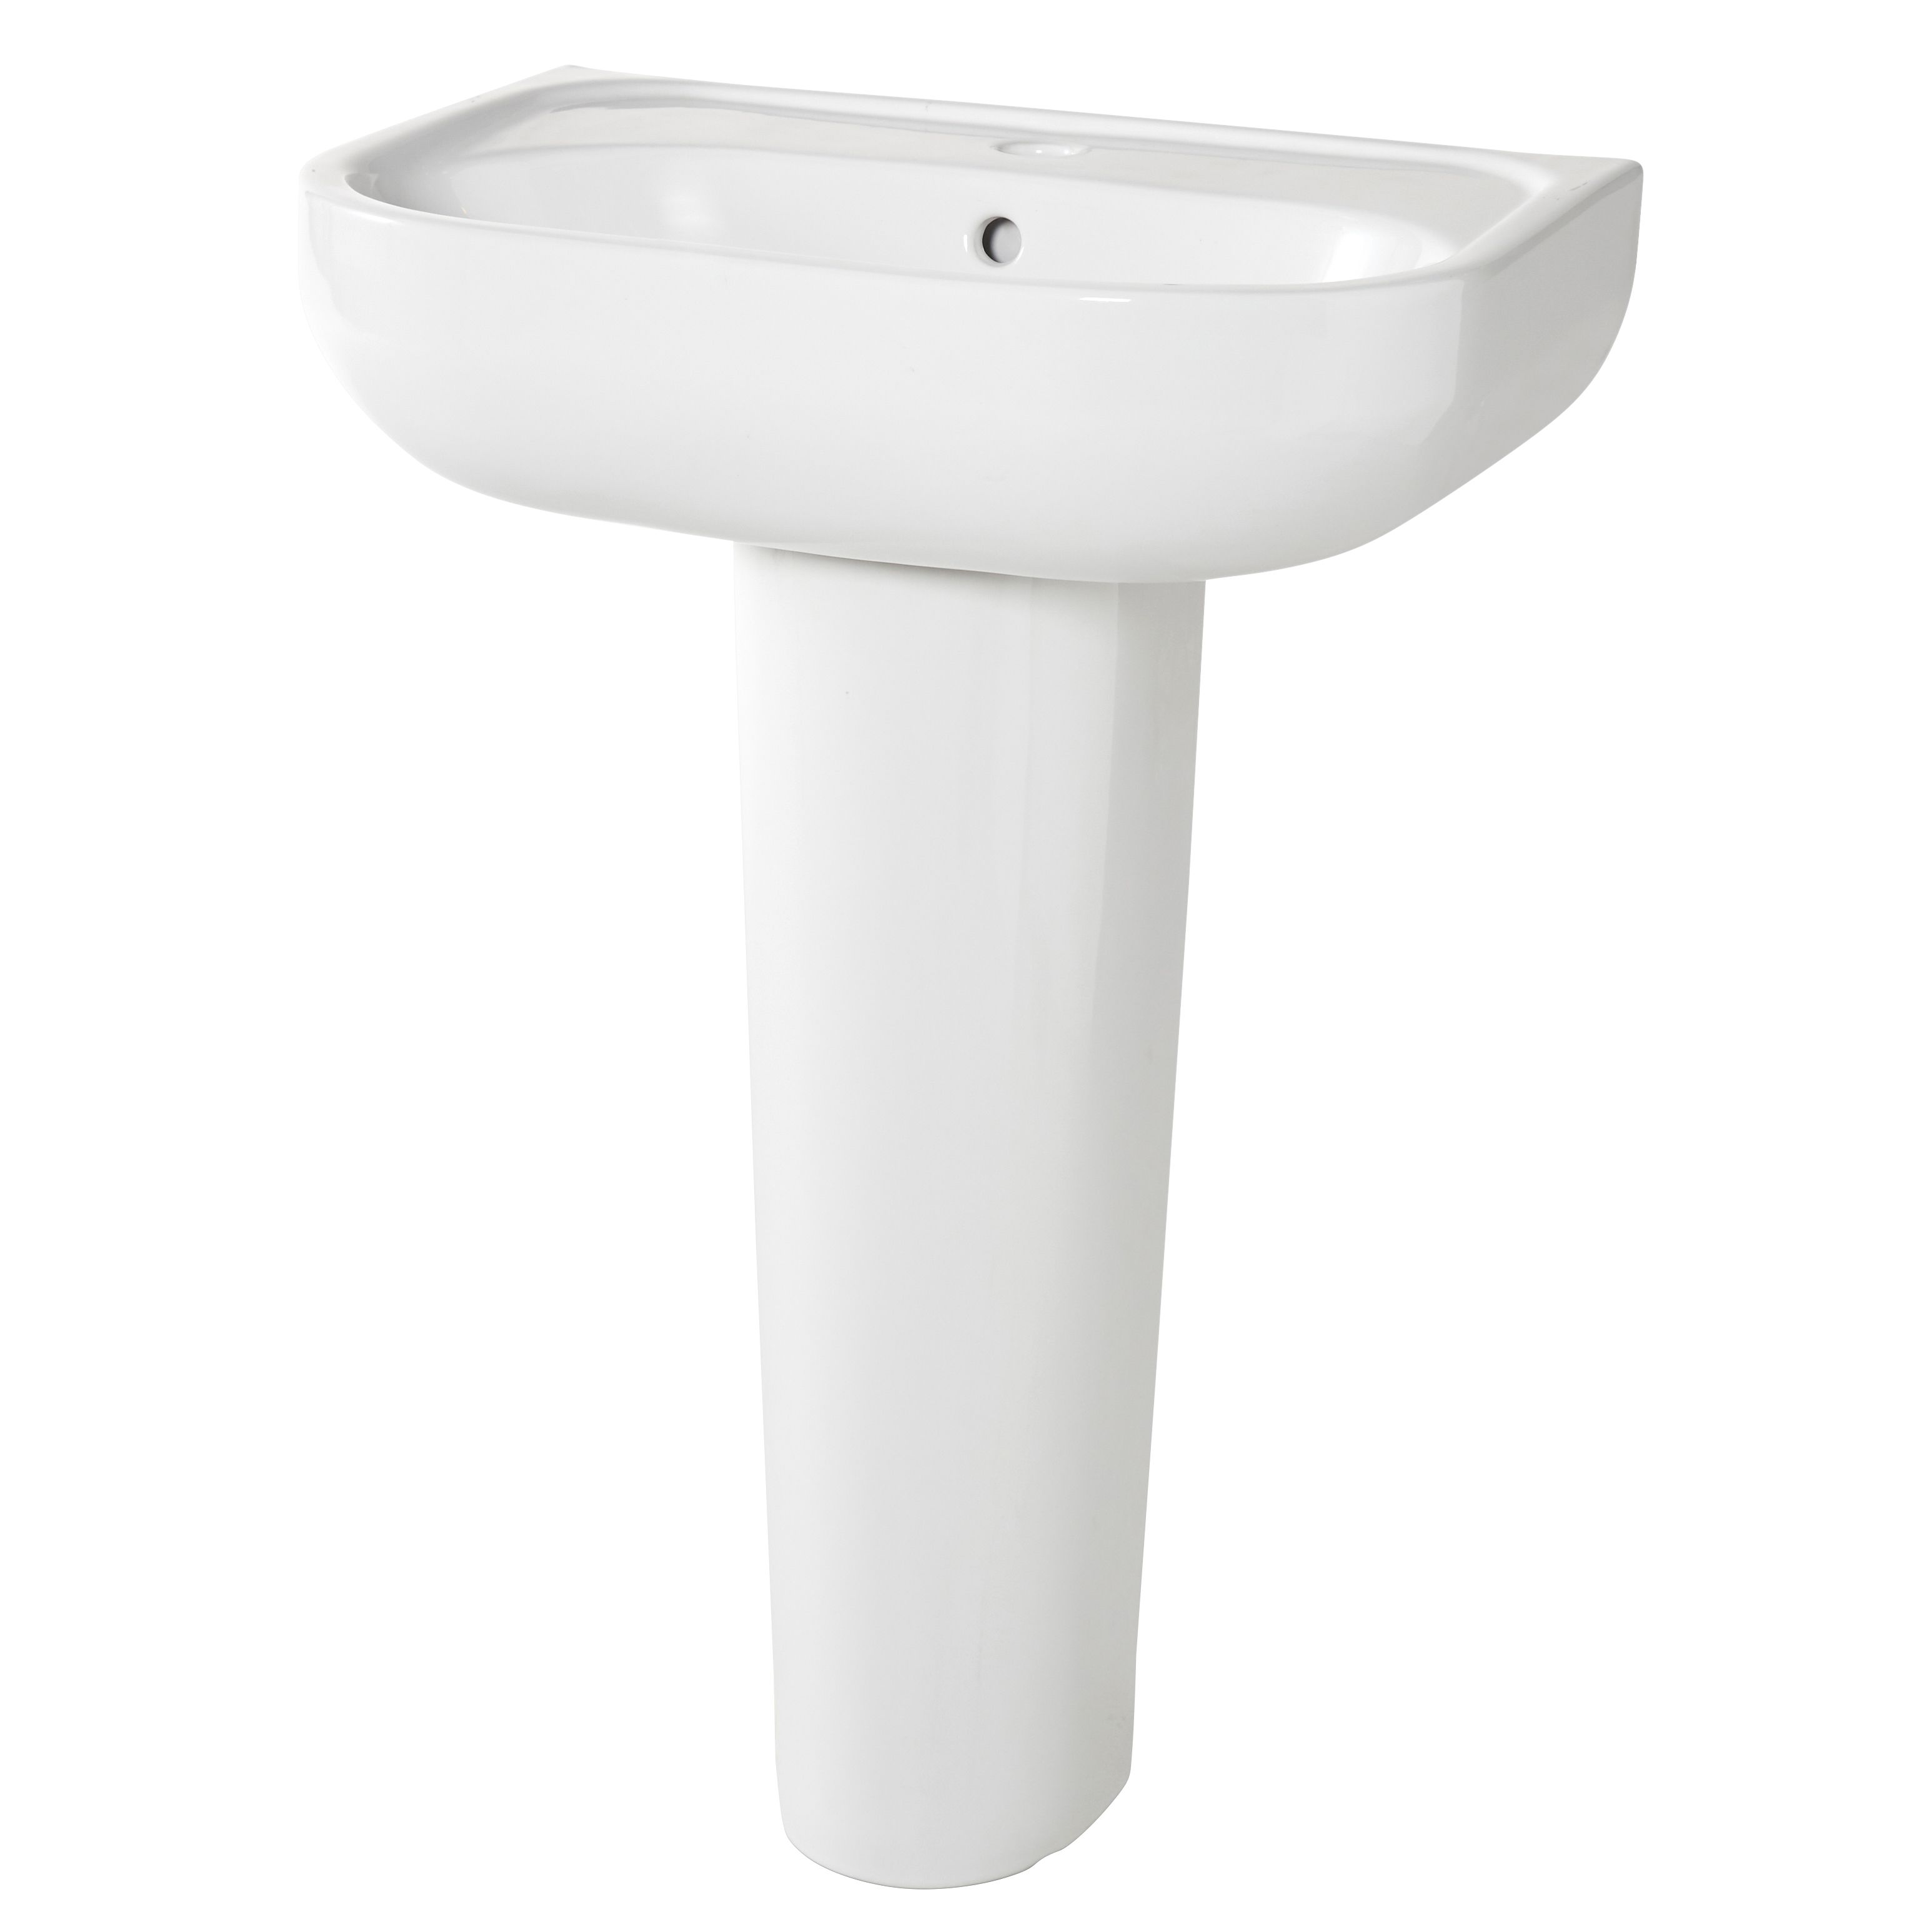 GoodHome Cavally compact White Close-coupled Floor-mounted Toilet & full pedestal basin (W)370mm (H)810mm